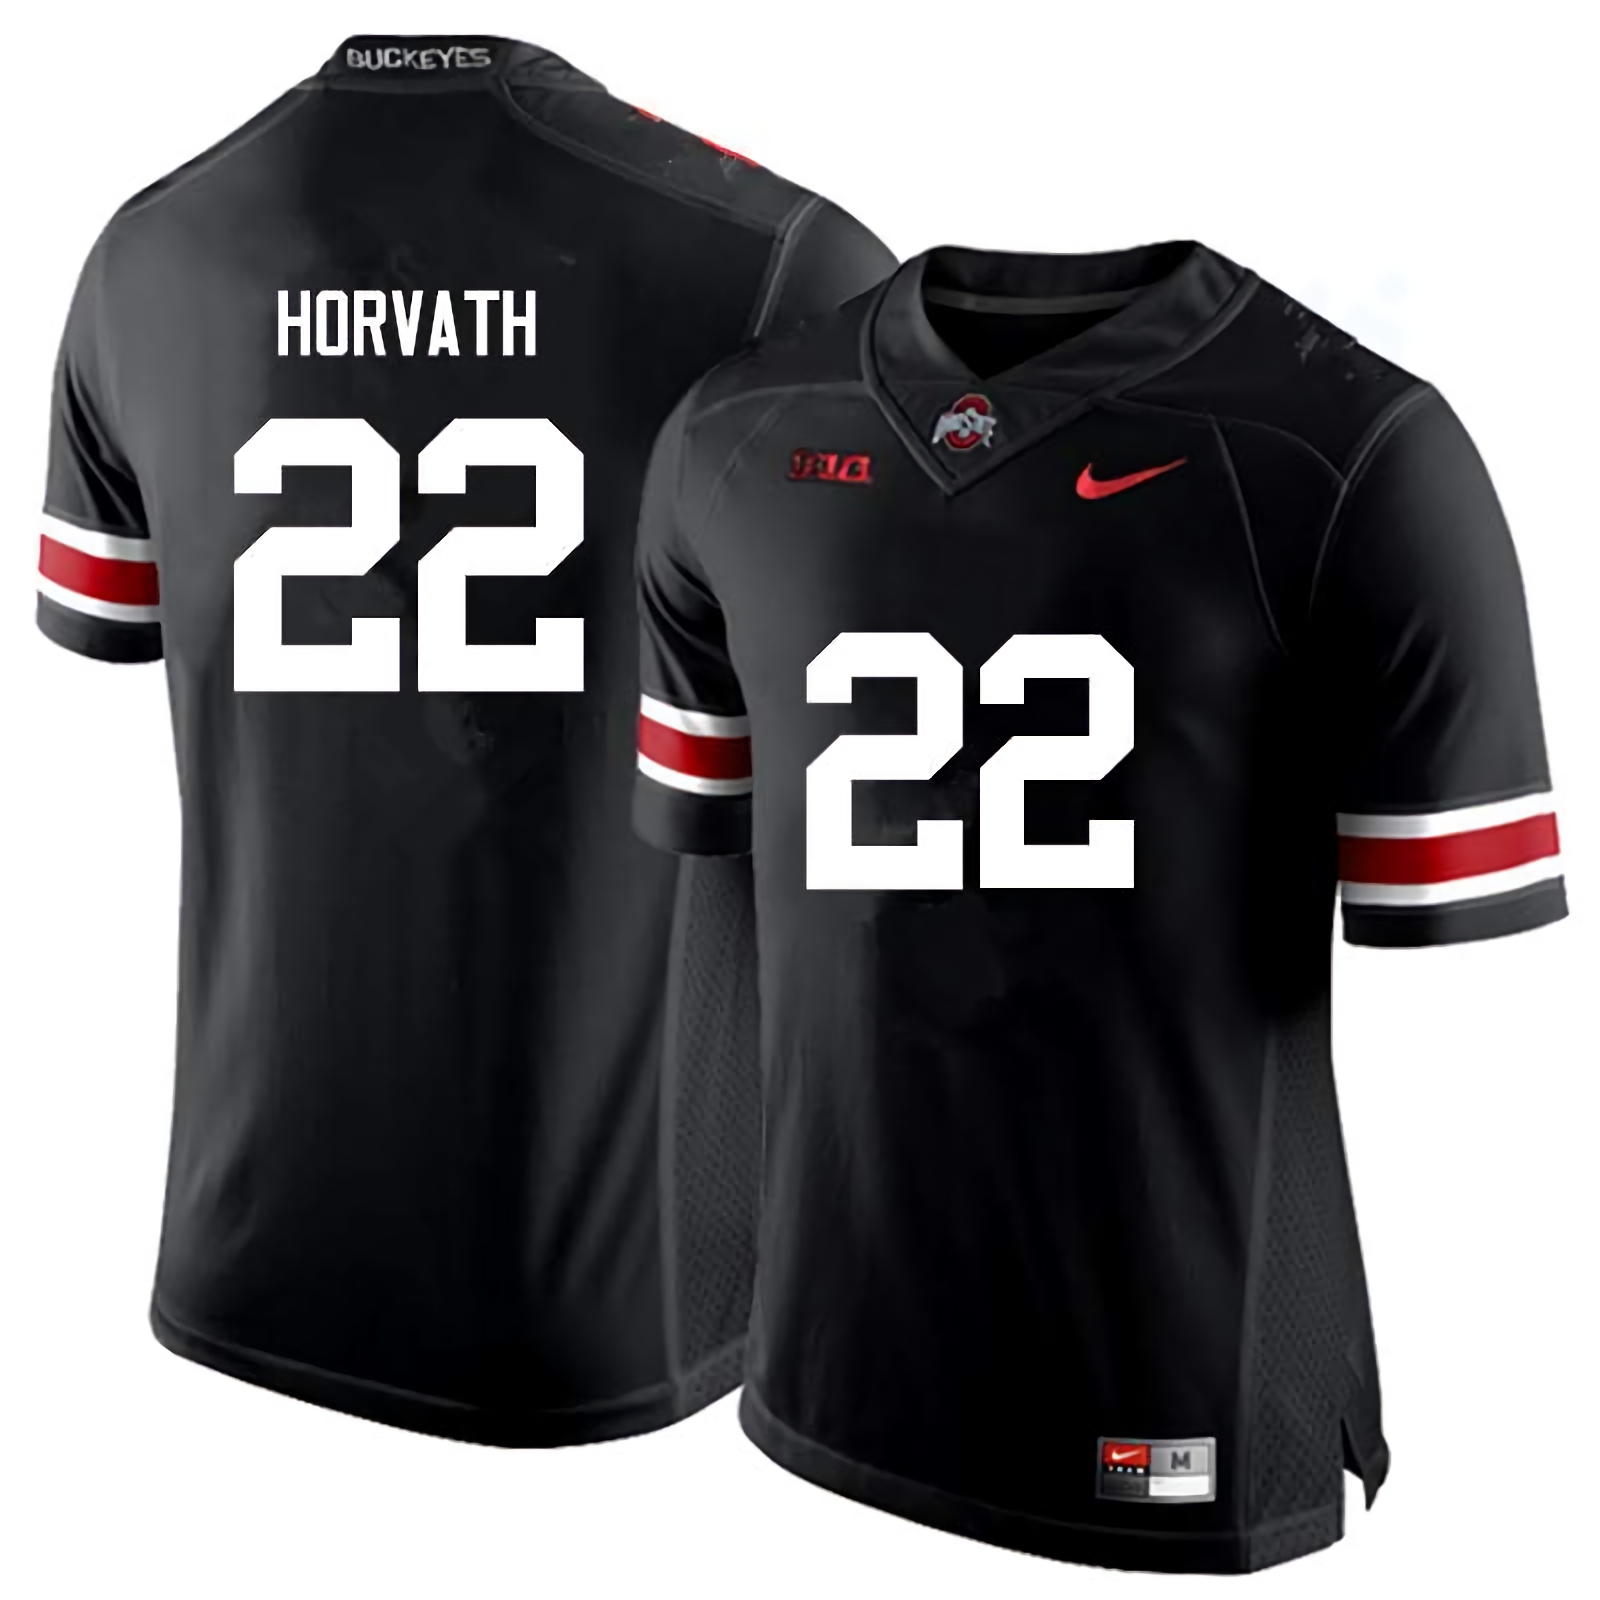 Les Horvath Ohio State Buckeyes Men's NCAA #22 Nike Black College Stitched Football Jersey LBL1356NX